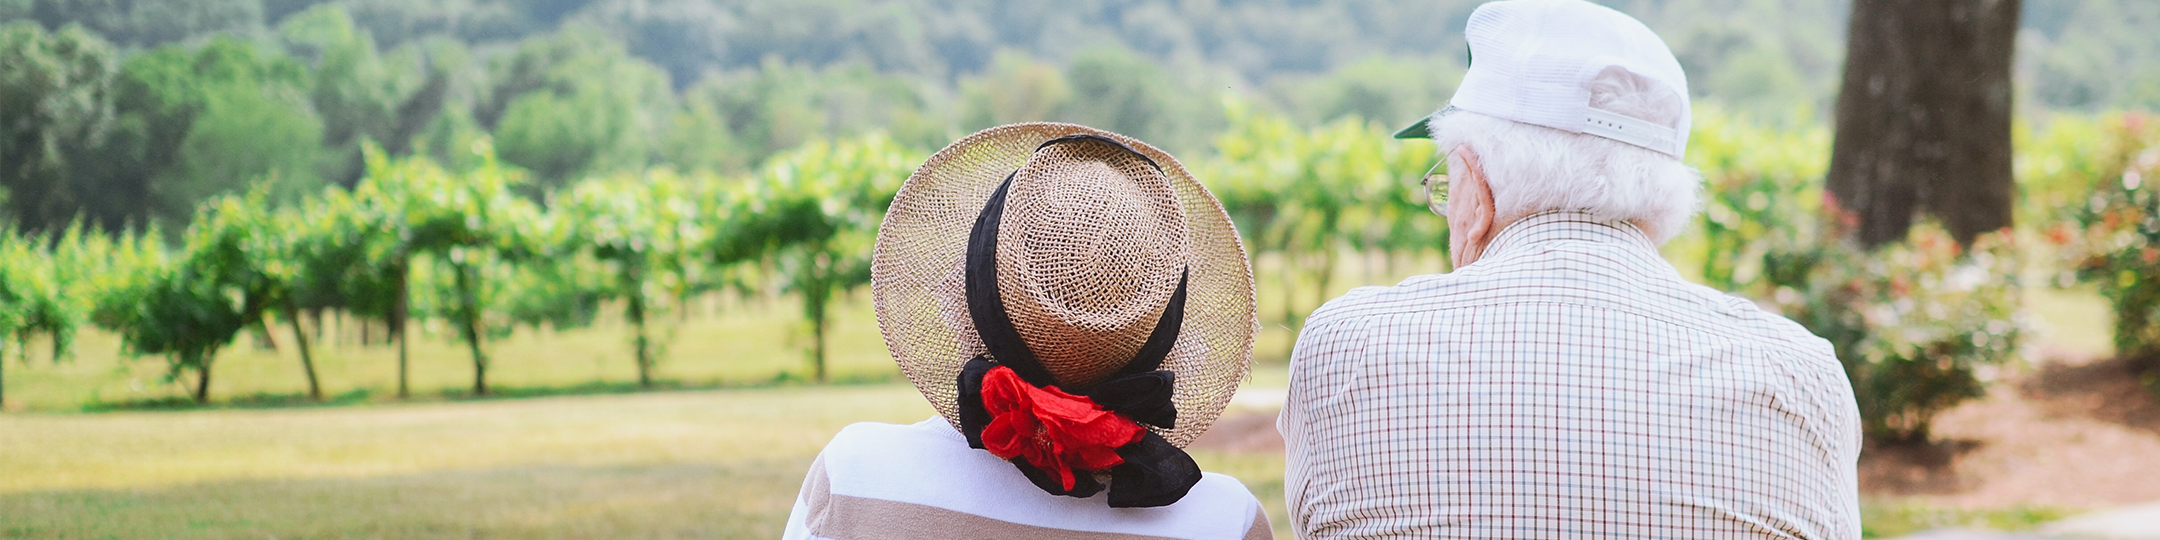 senior man and woman in hat sitting on a bench overlooking a green vineyard